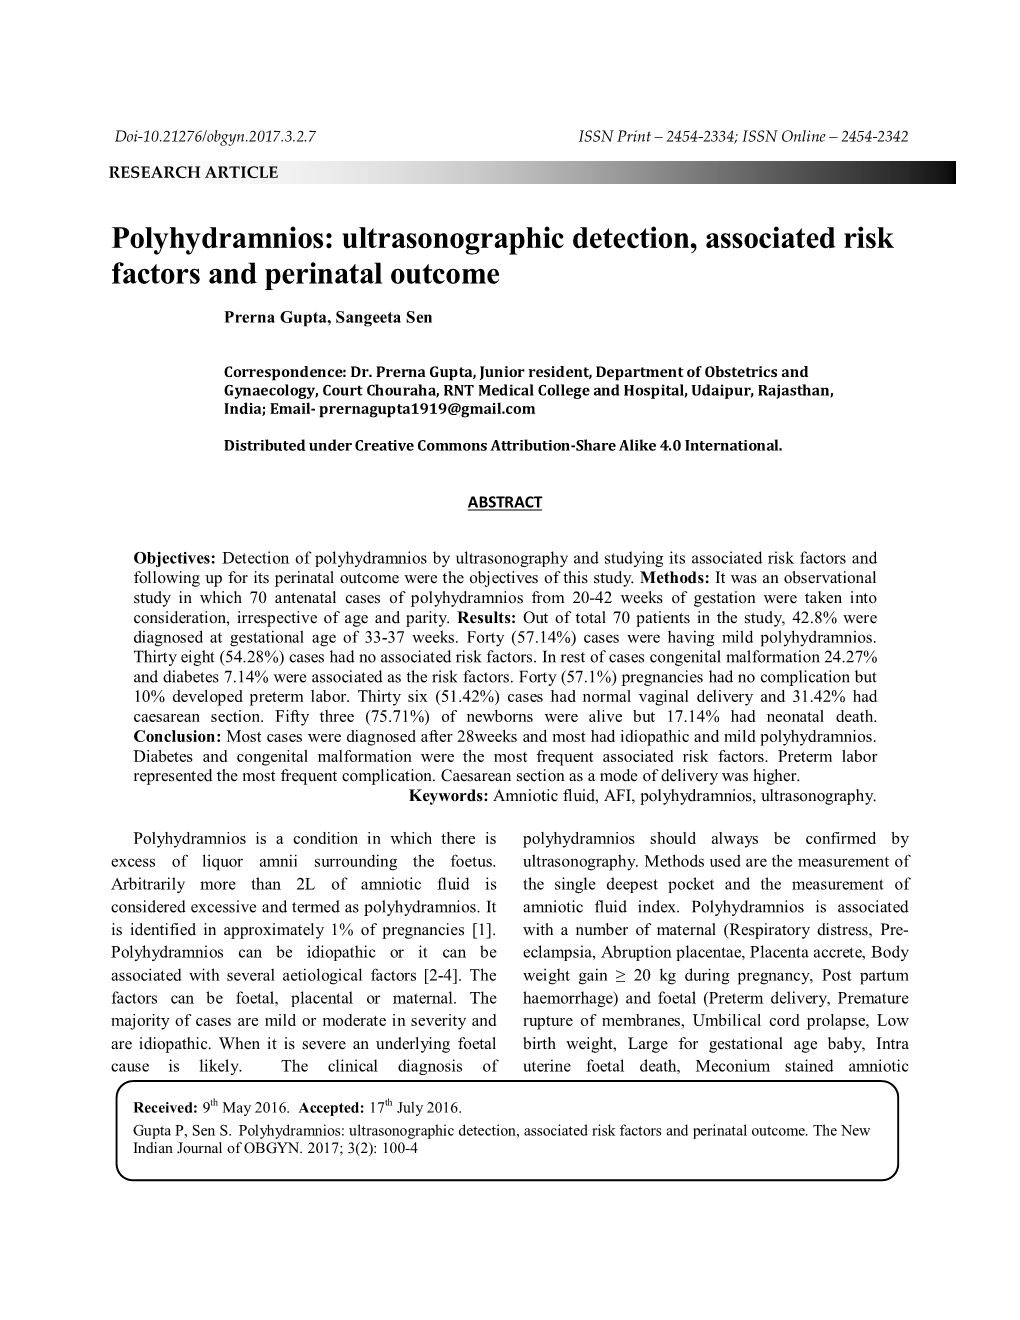 Polyhydramnios: Ultrasonographic Detection, Associated Risk Factors and Perinatal Outcome